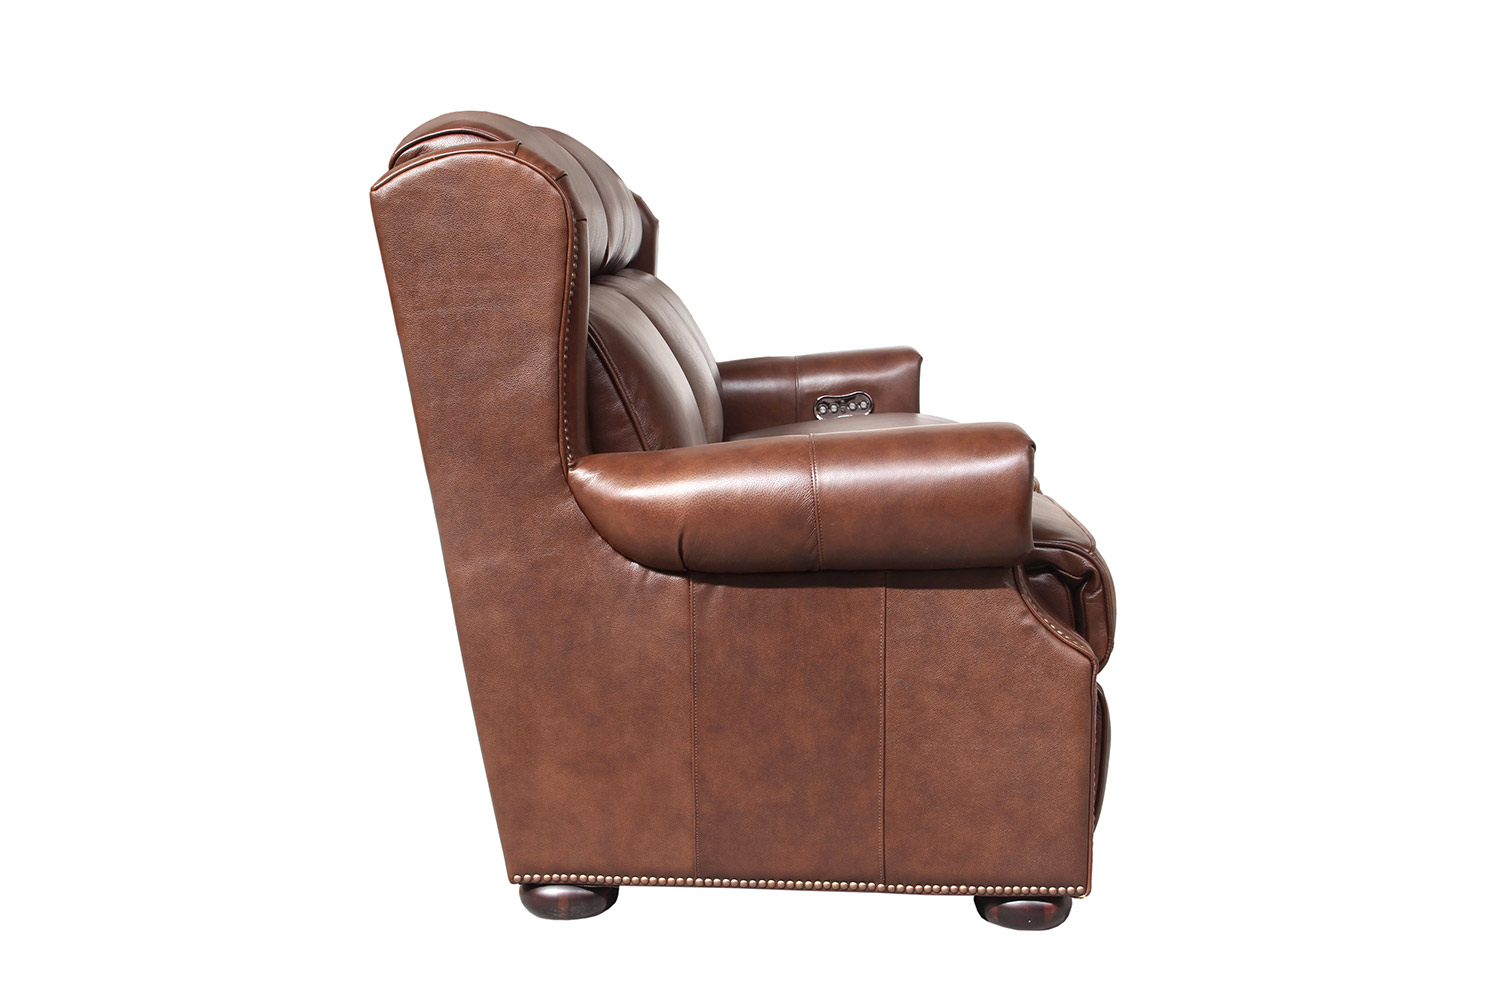 Barcalounger Benwick Power Reclining Sofa with Power Head Rests - Shoreham Chocolate/All Leather